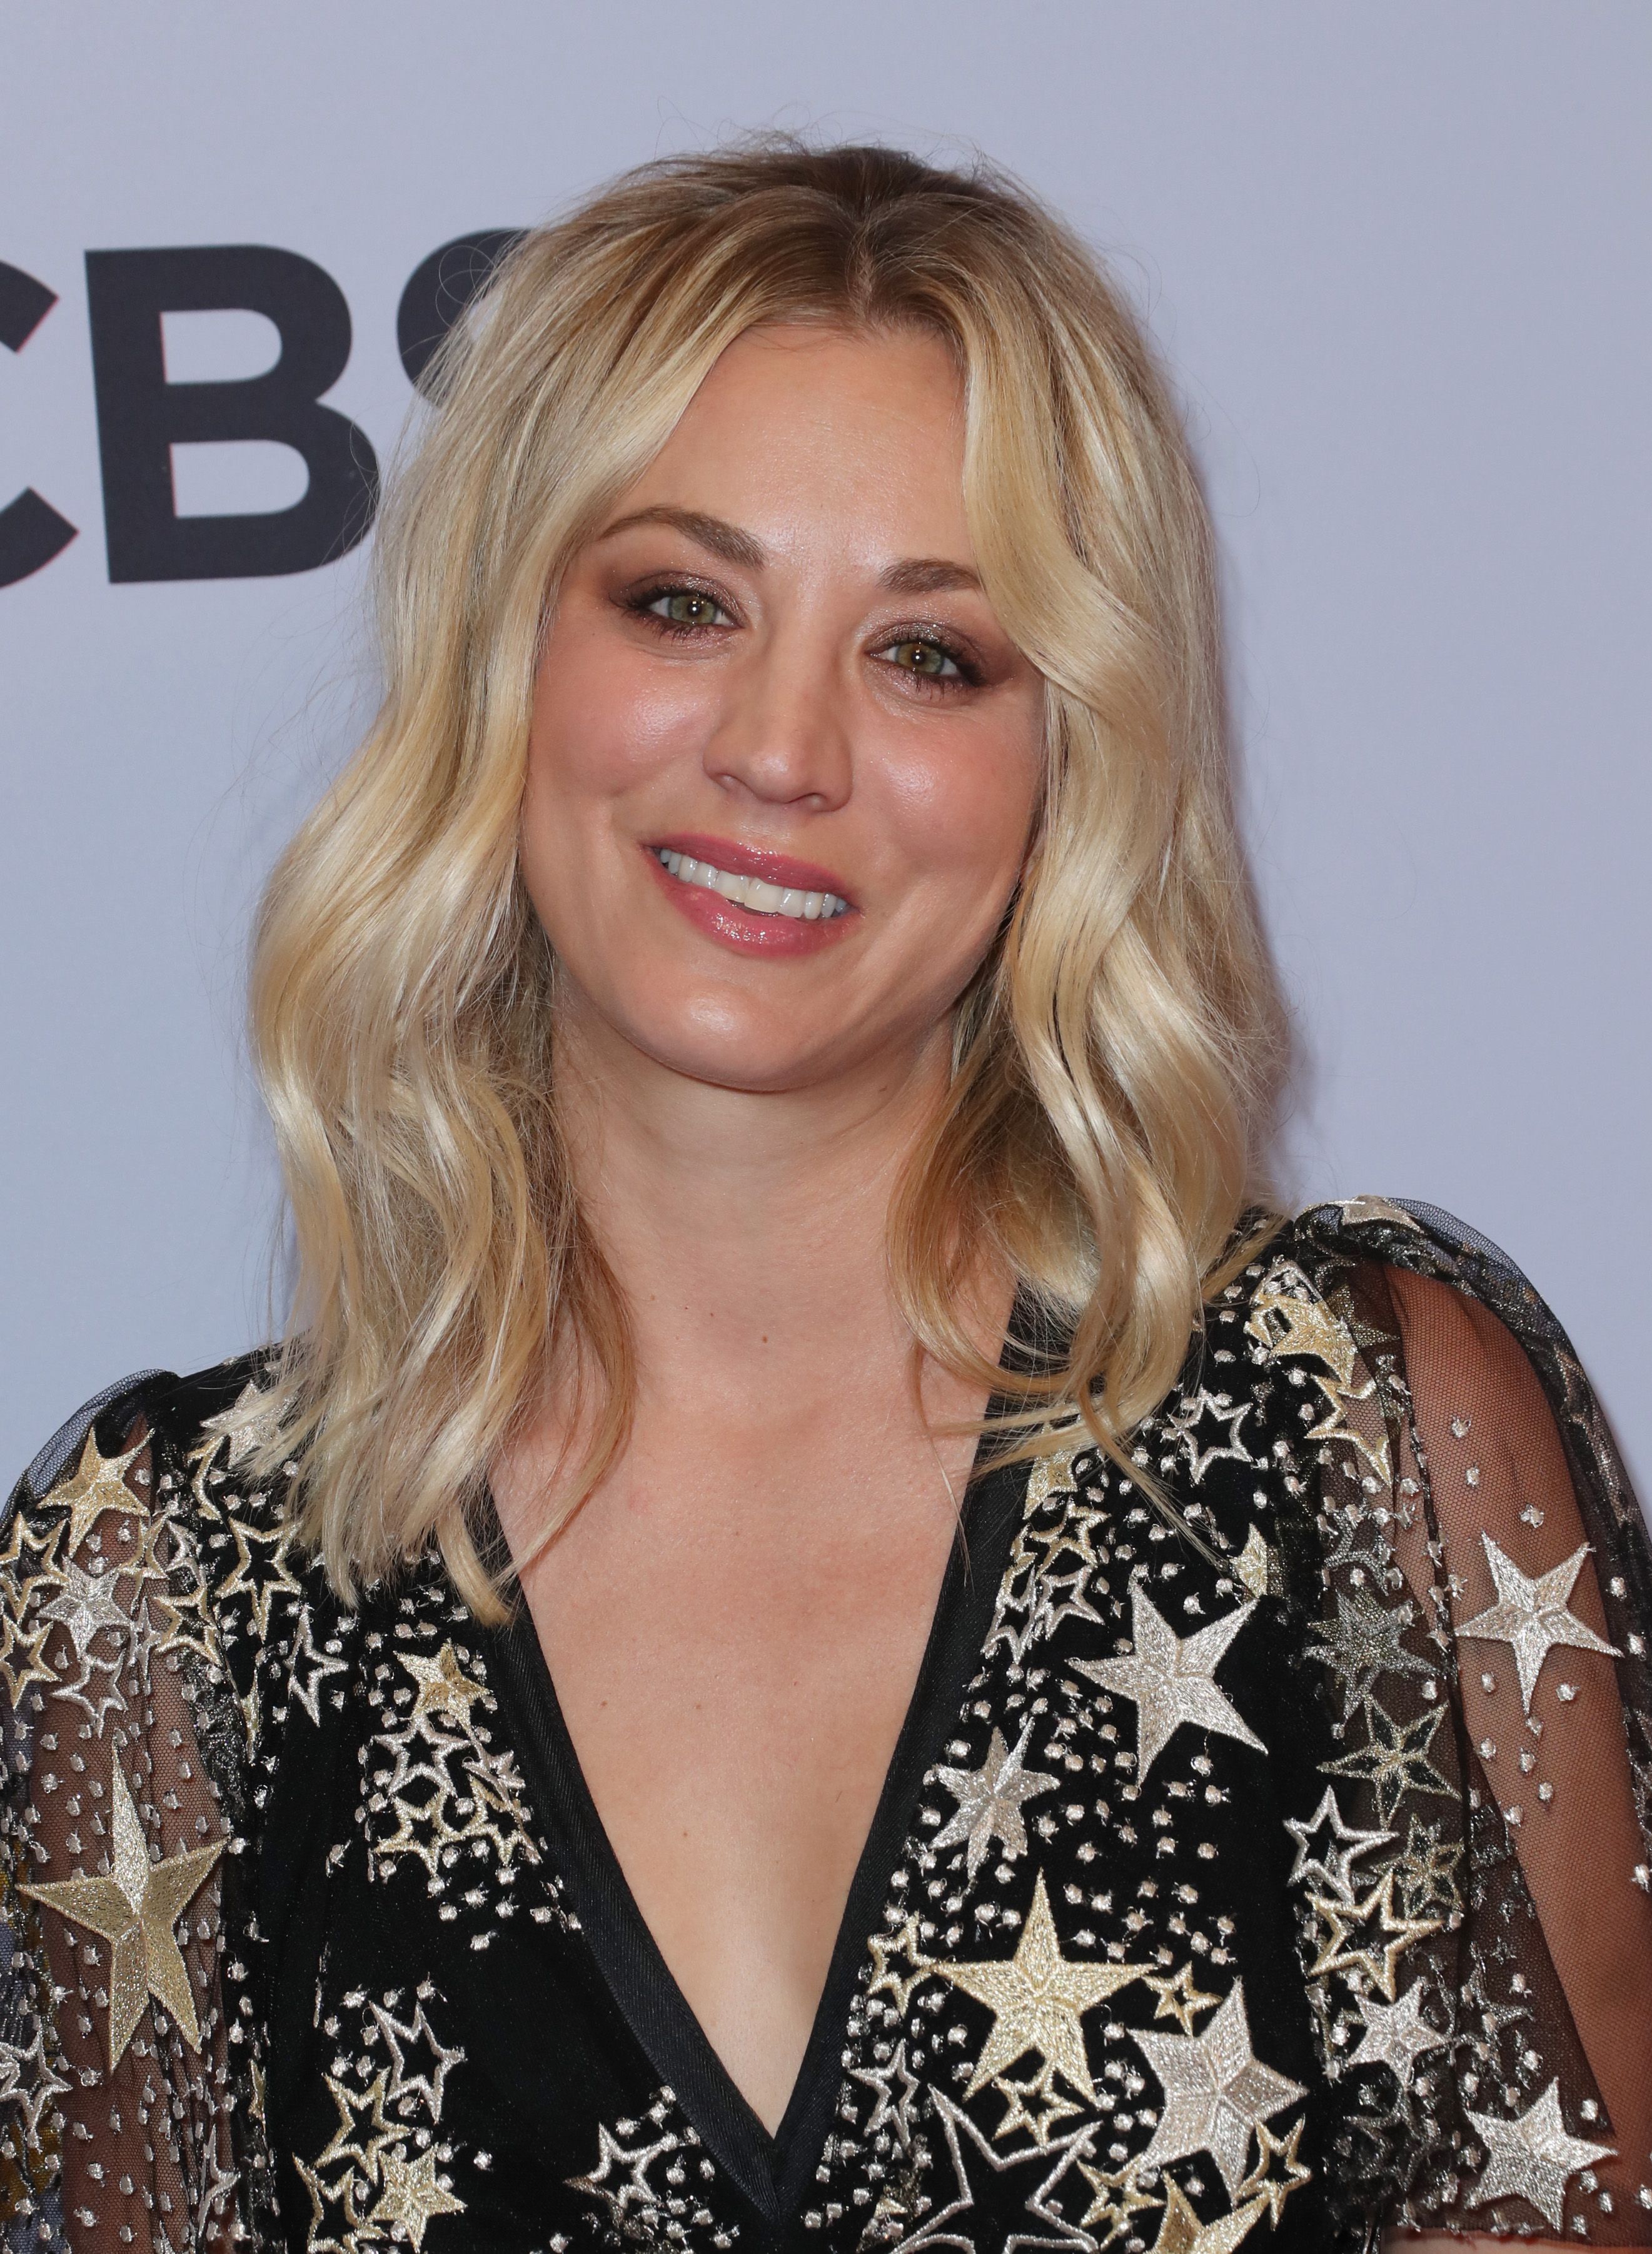 Kaley Cuoco to Star in Limited Series After Launching Her Own